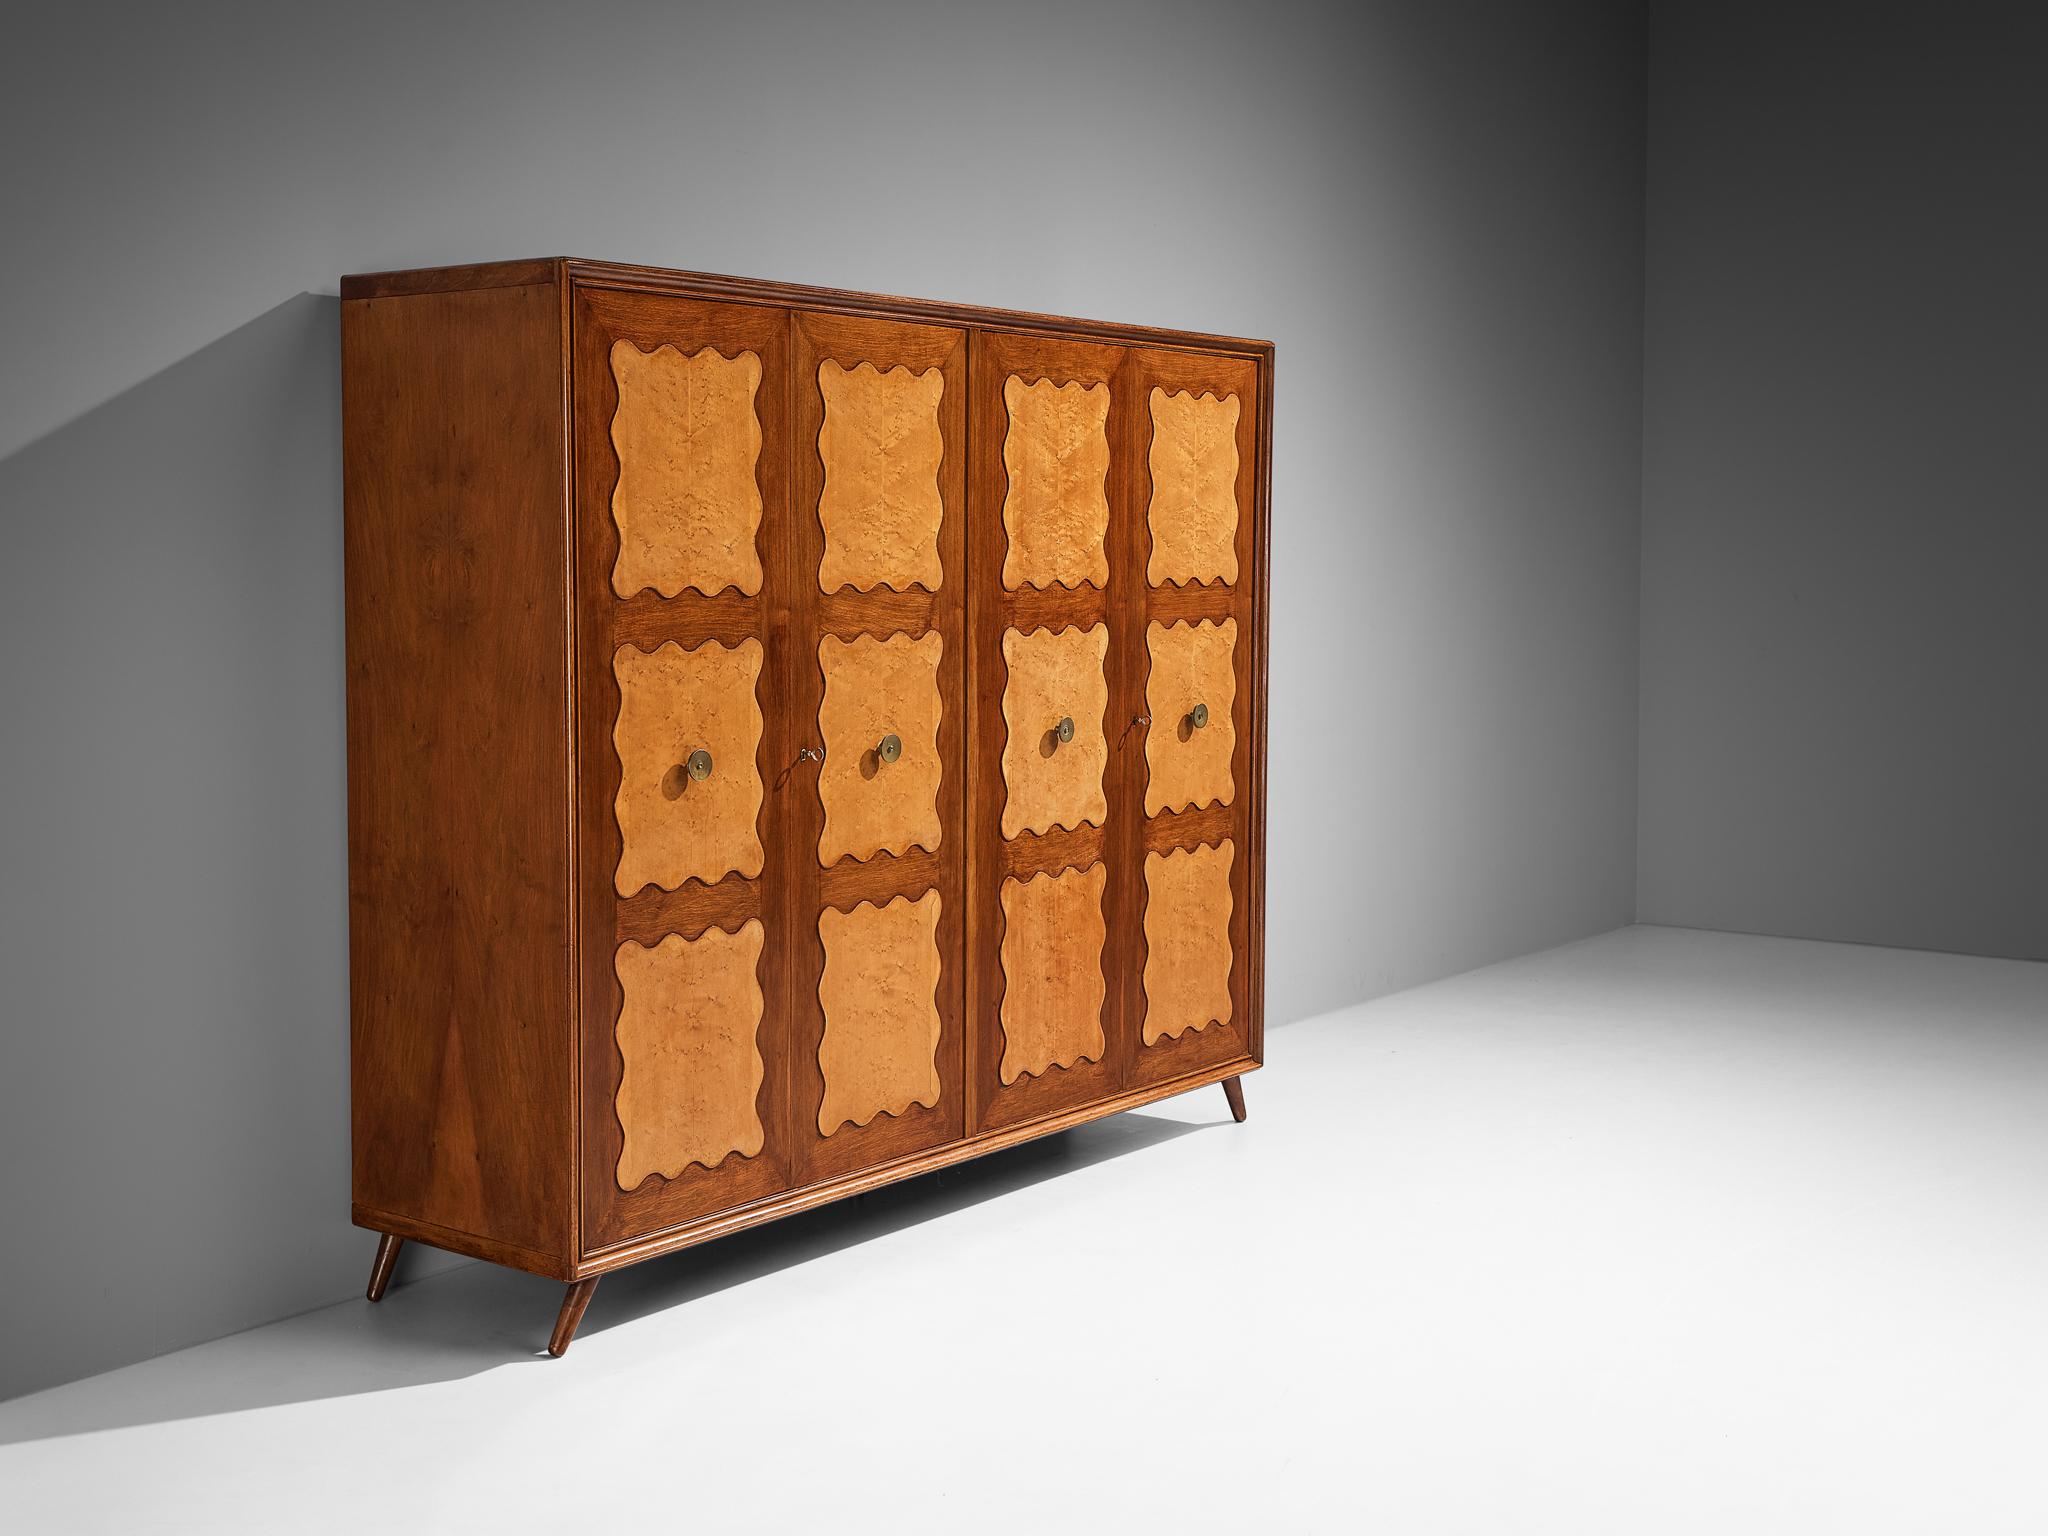 Wardrobe, walnut, birch, beech, brass, mirrored glass, steel, aluminum, Italy 1940s/1950s

The decorative elements, material use, woodworking, and the overall composition suggest that this armoire might have been crafted by an Italian master. This